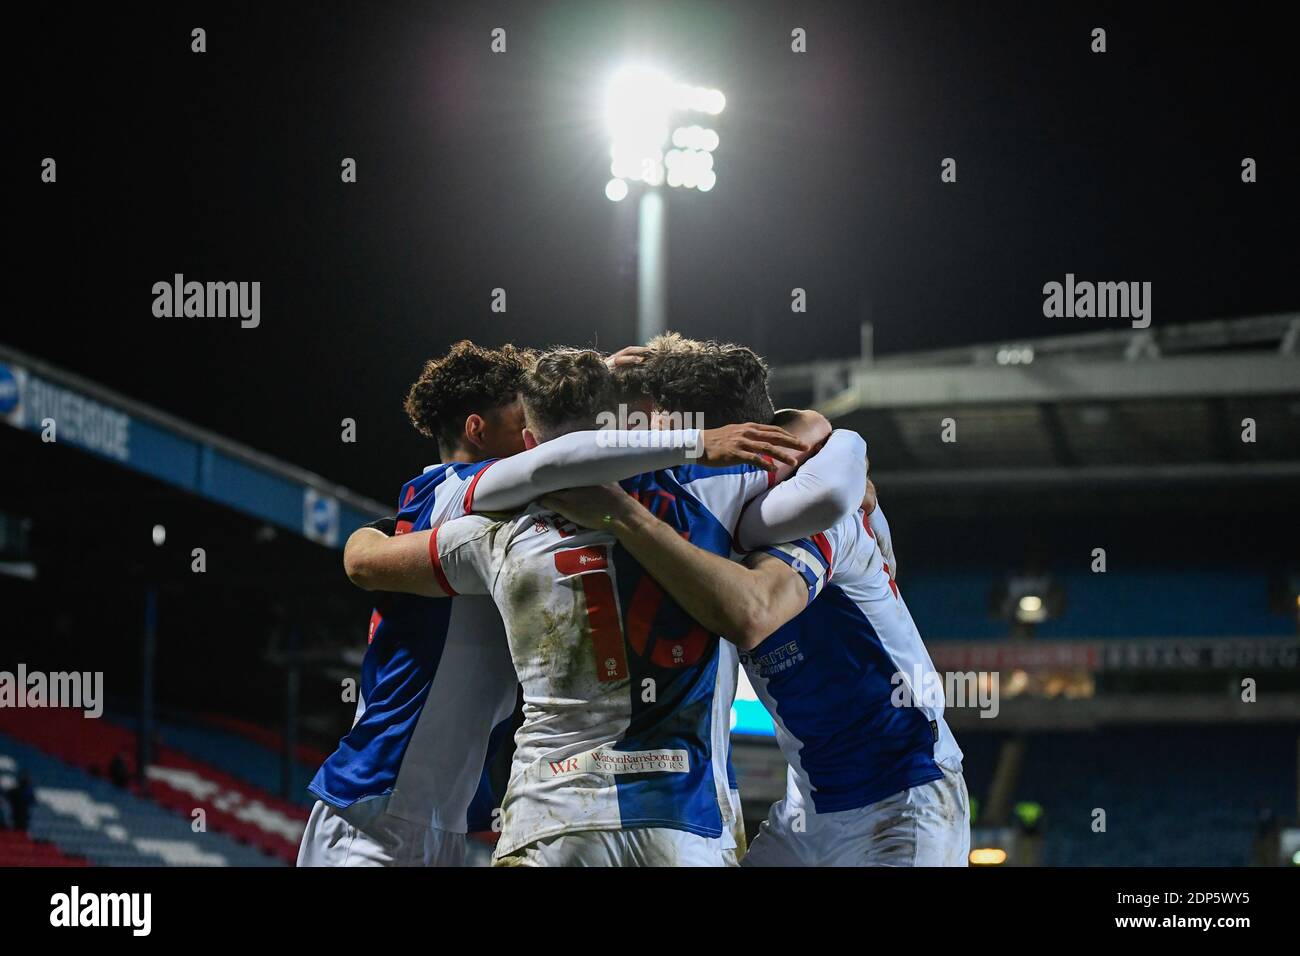 The Blackburn Rovers players celebrate after Adam Armstrong #7 of Blackburn Rovers scored a goal in the final moments of the game to make it 2-1 Stock Photo